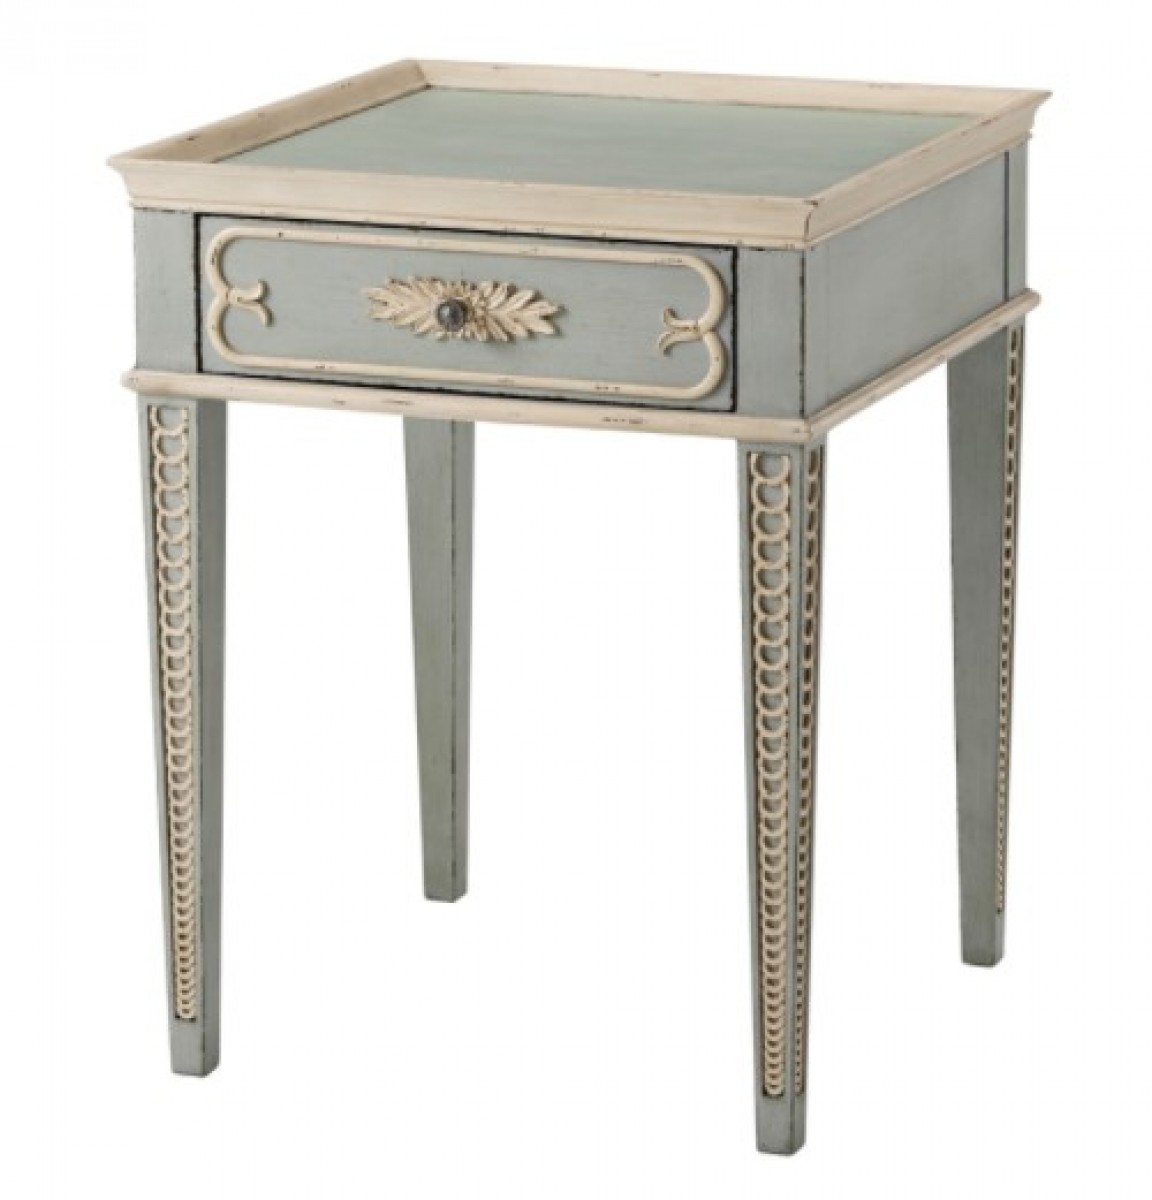 The Gaston Side Table